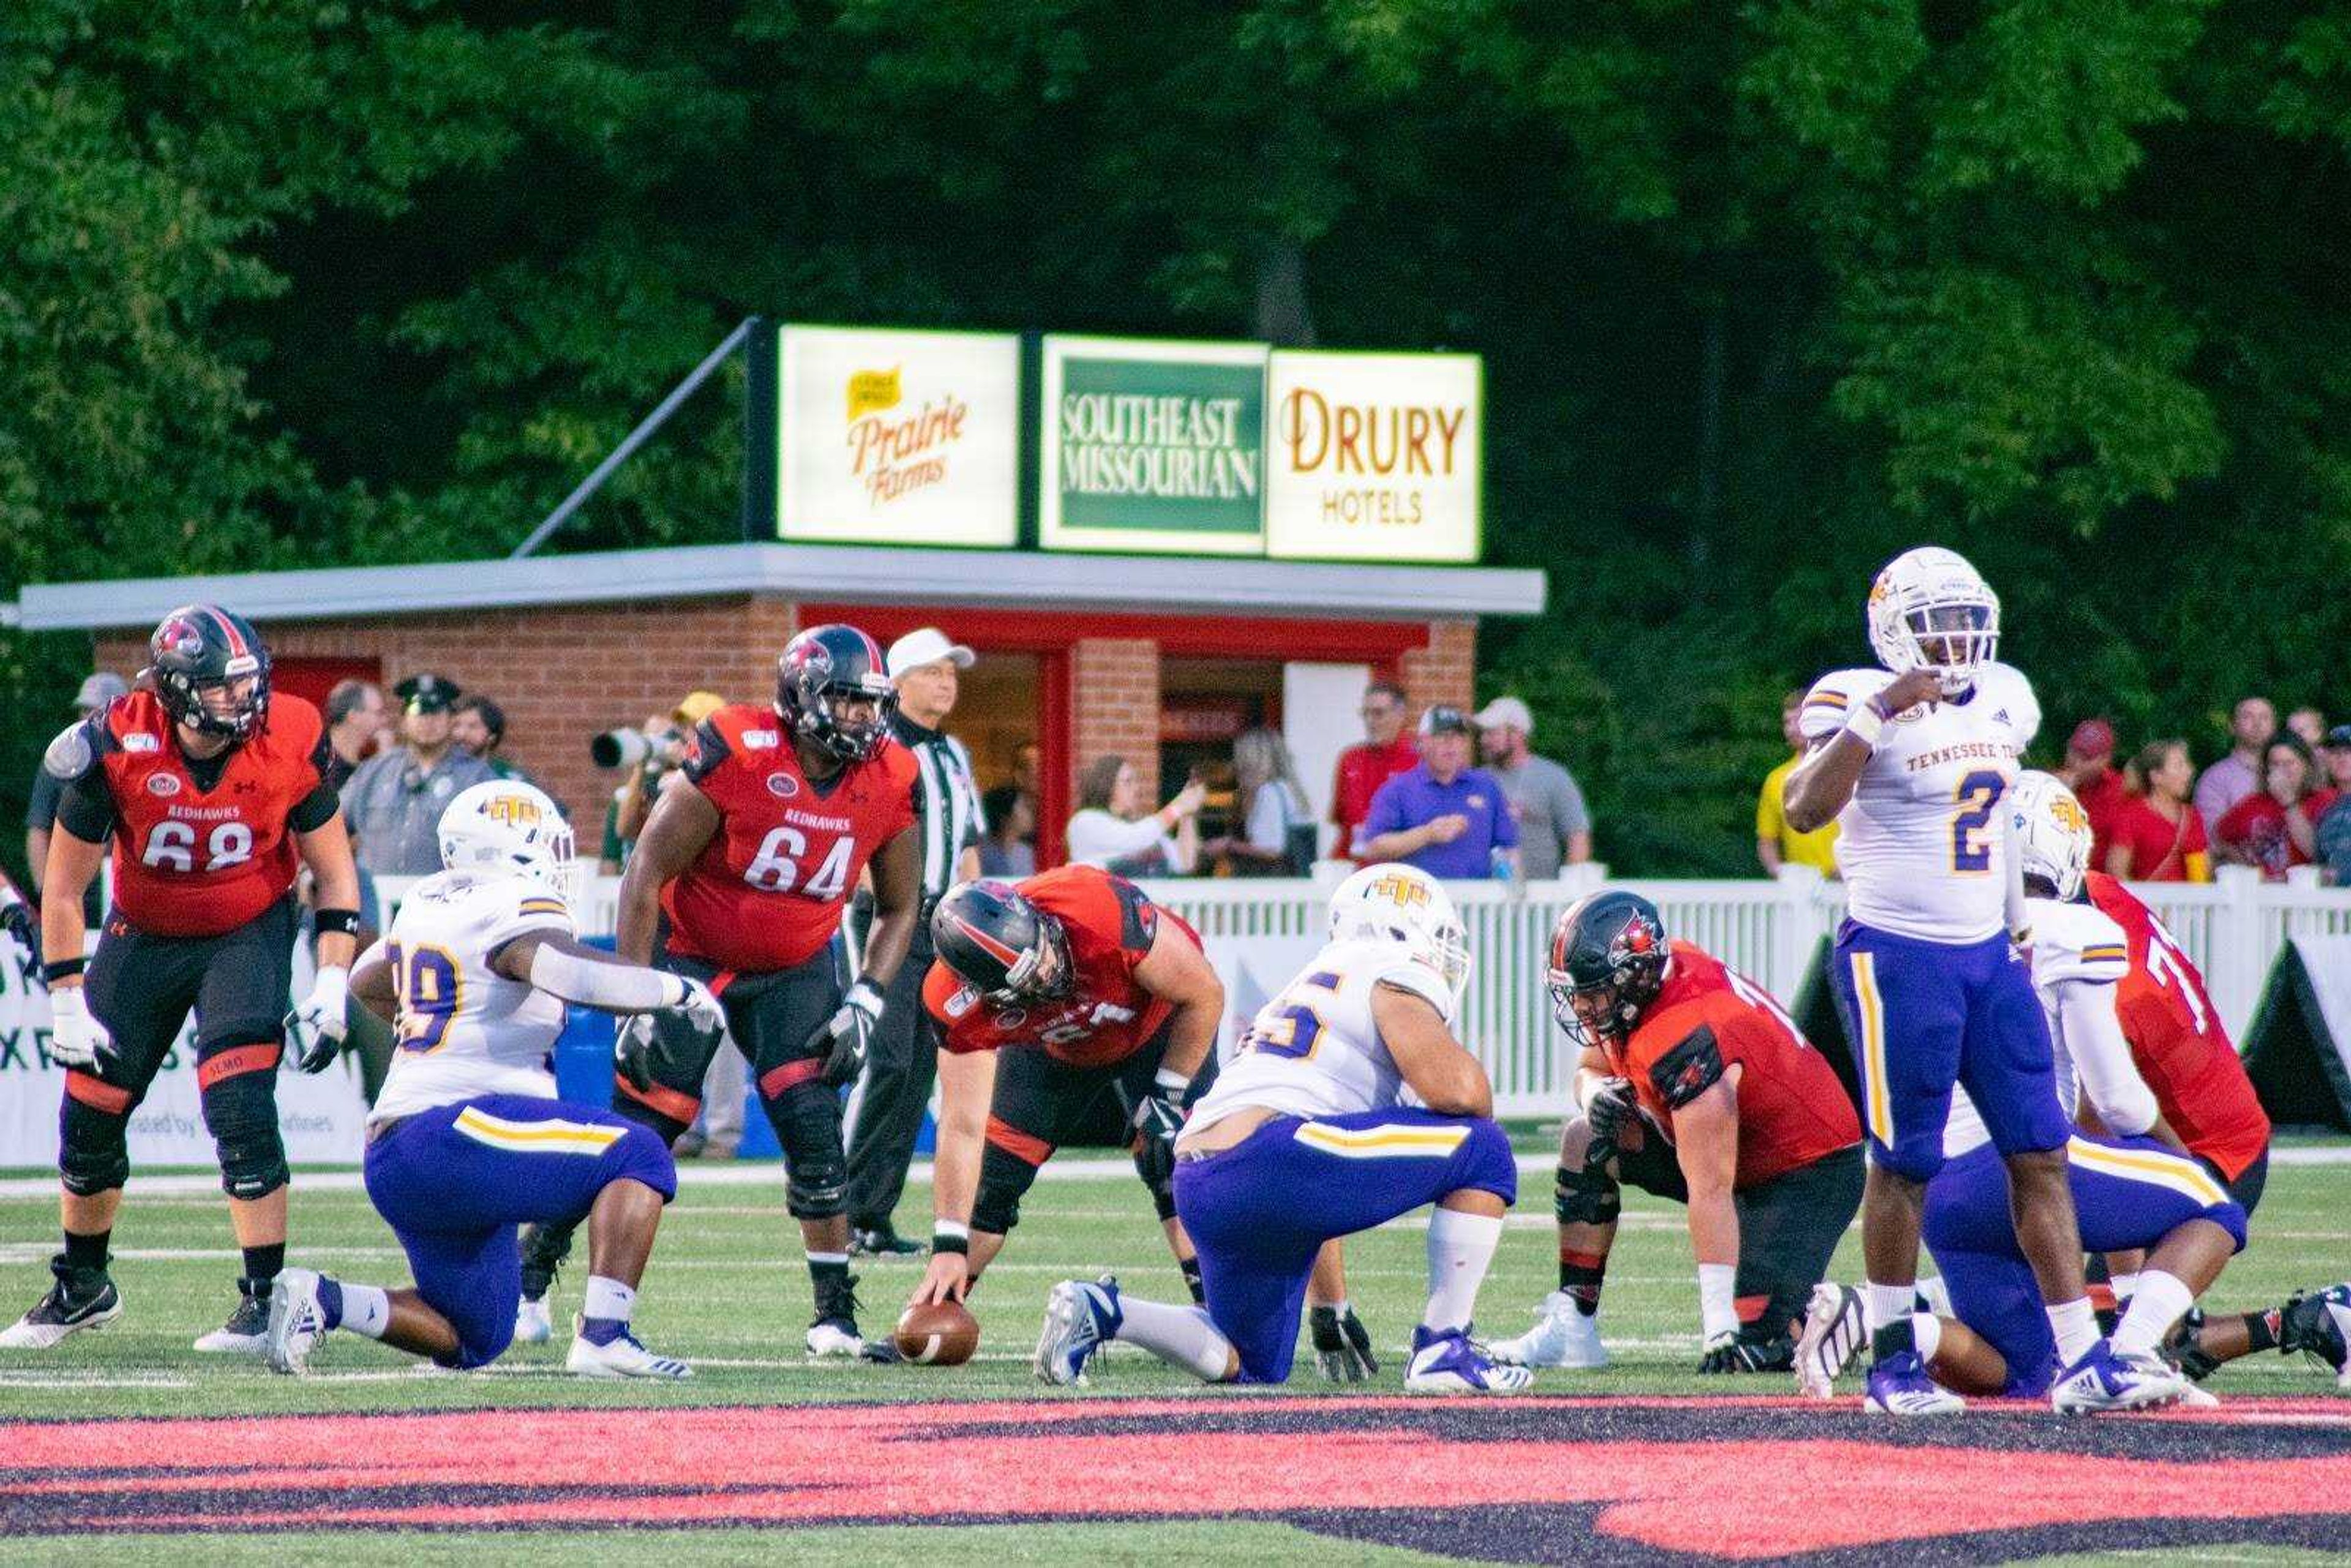 Junior center Dane Nelson prepares to snap the ball on an offensive drive against Tennessee Tech at Houck Field, Oct. 5. The Redhawks offensive line allowed four sacks on the day but blocked well in the run game. Southeast rushed for 221 yards and five touchdowns in the win.